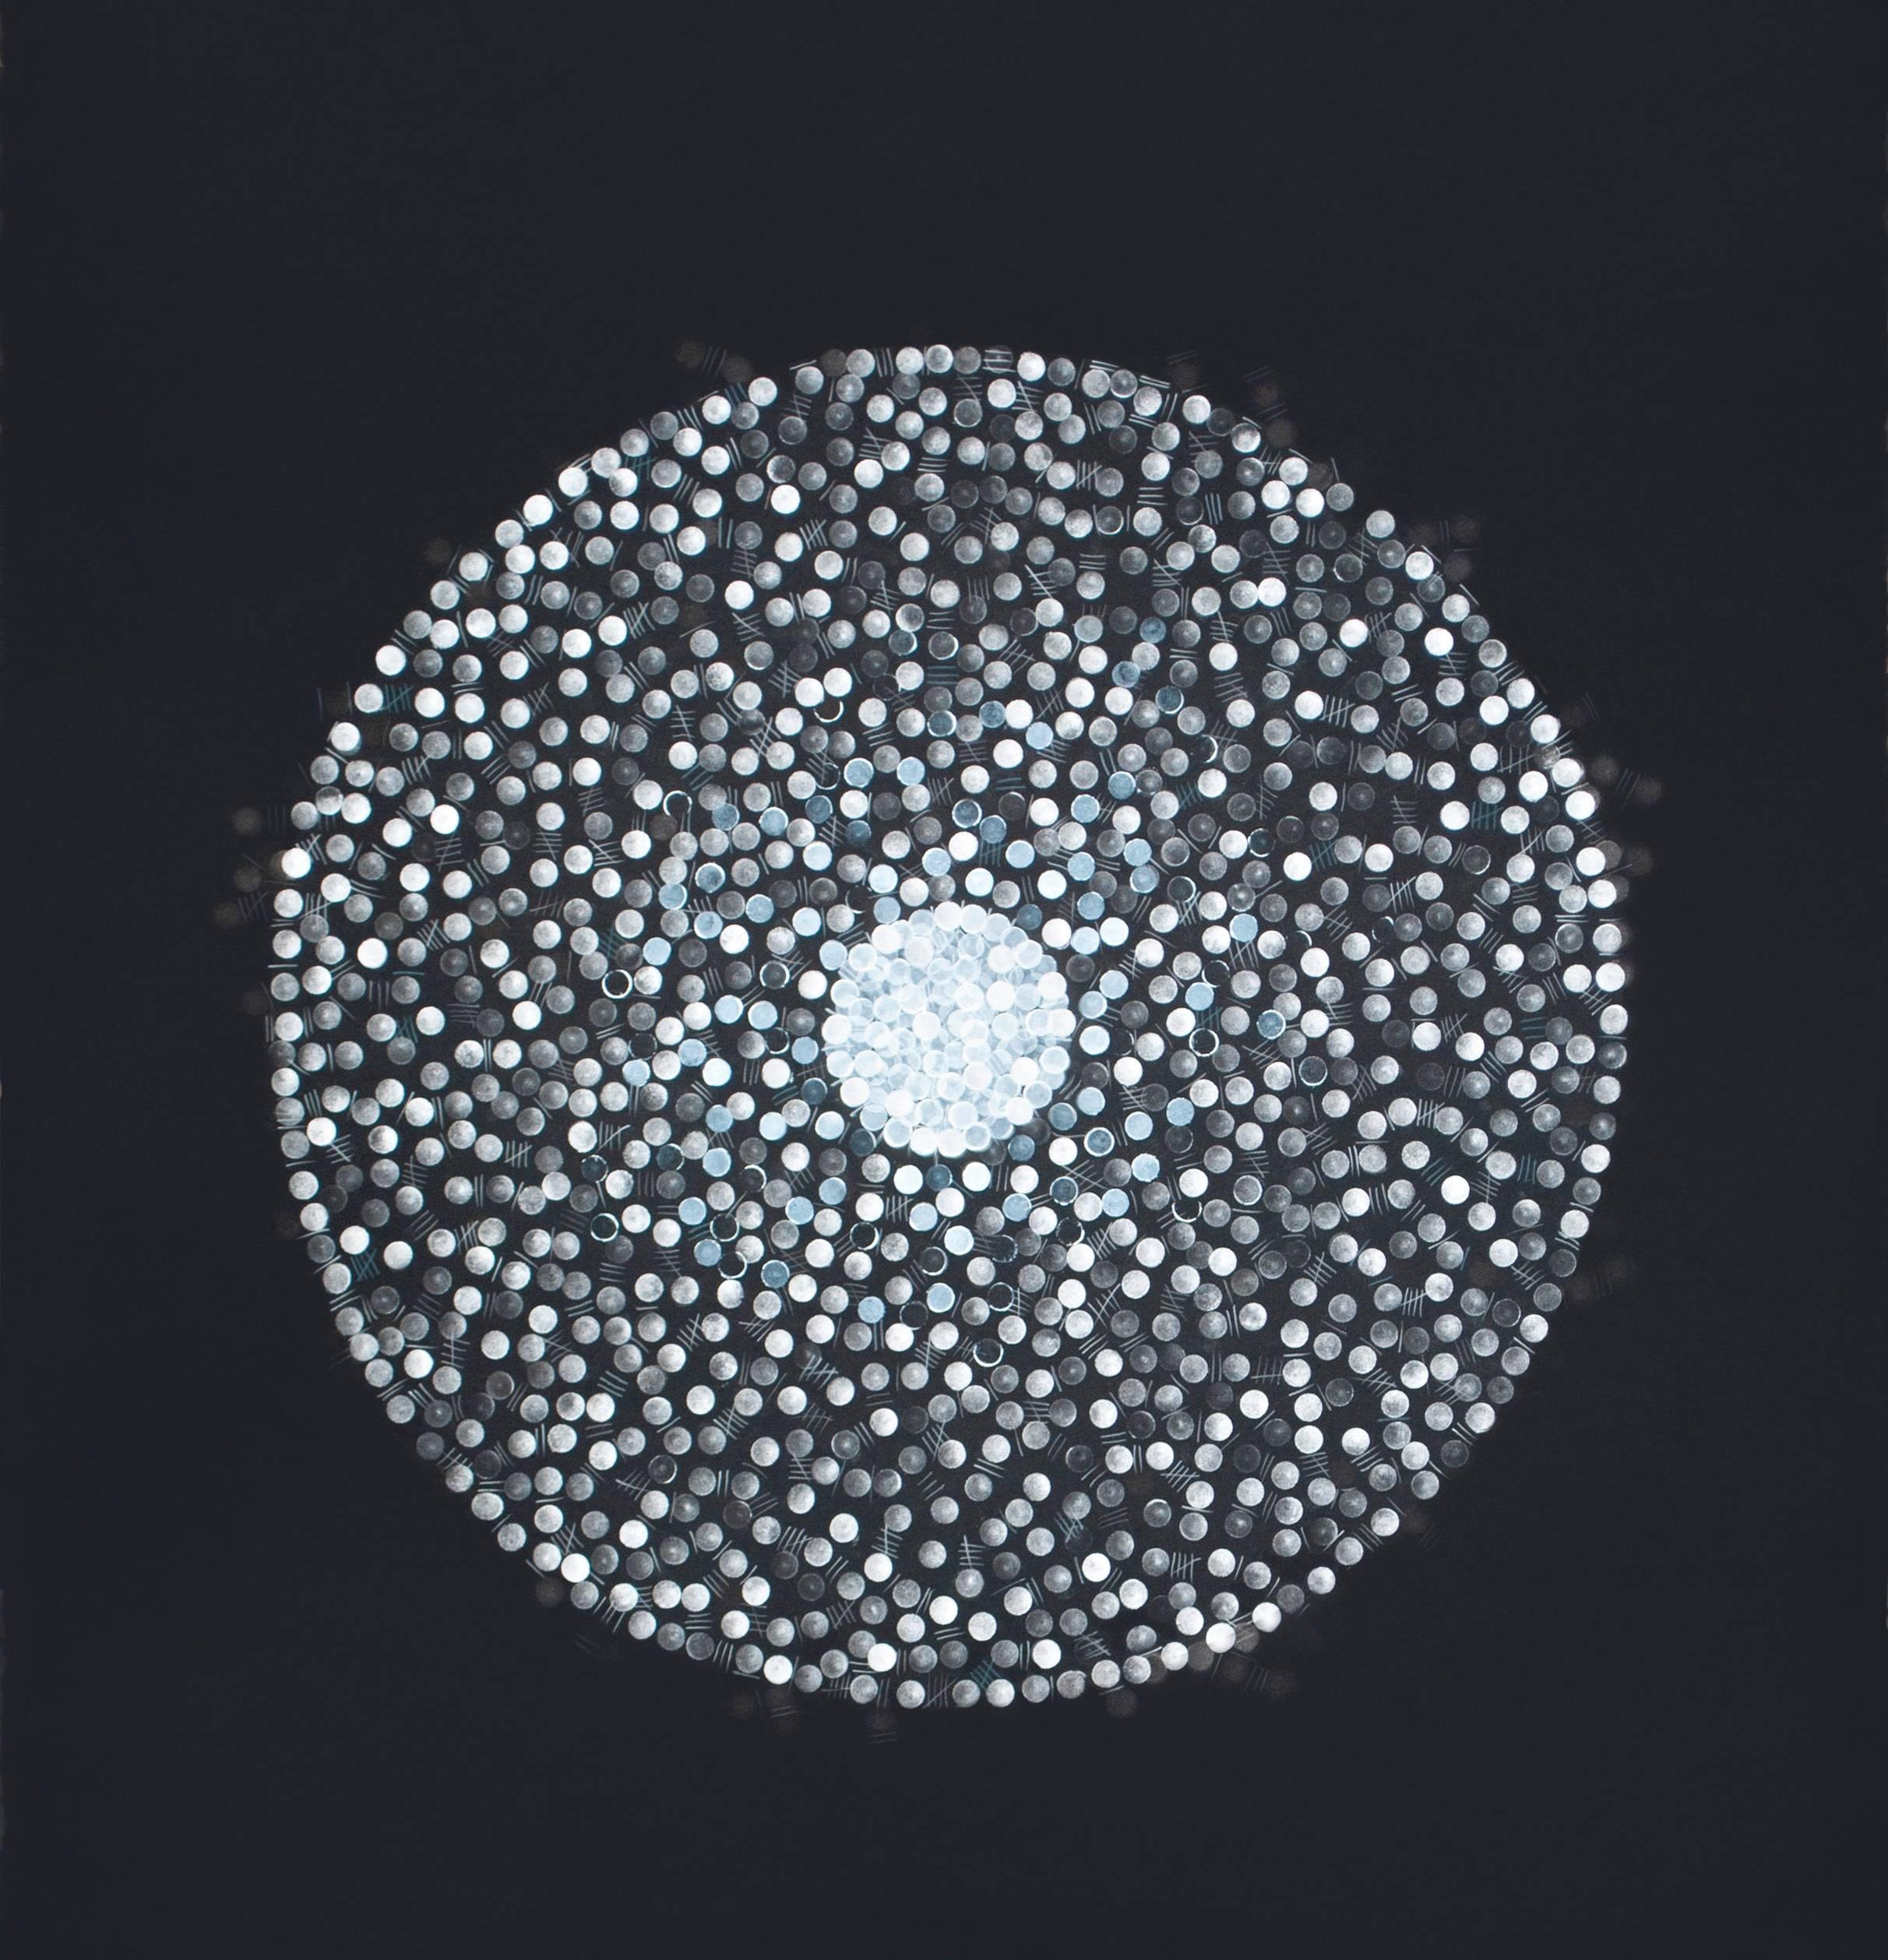 Barbara Kolo’s one-of-a-kind painting consists of a collection of dots and lines, carefully placed with silver ink on paper.  By applying hundreds of small, distinct dots of ink in a pattern to form the image of a unique shape, Kolo relies on the